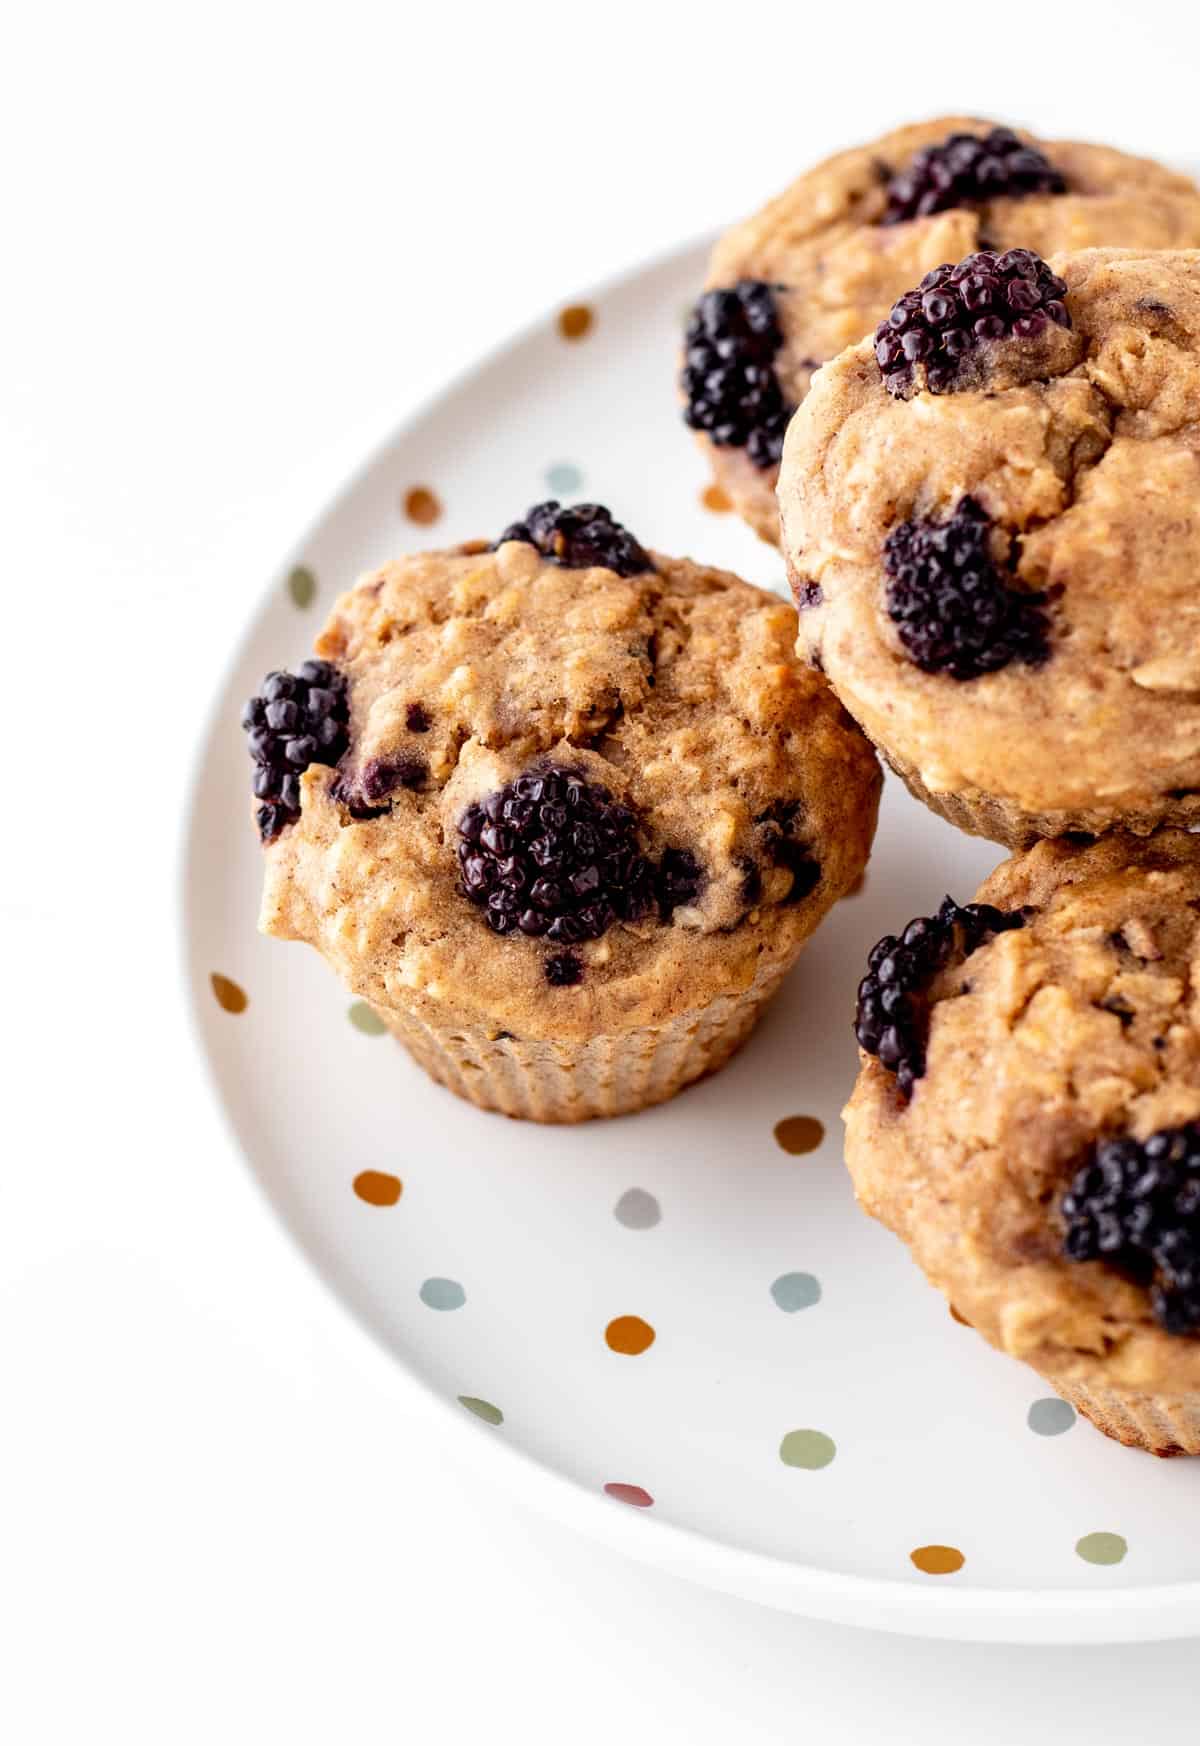 Blackberry muffins with yogurt on a colorful polka dotted plate.